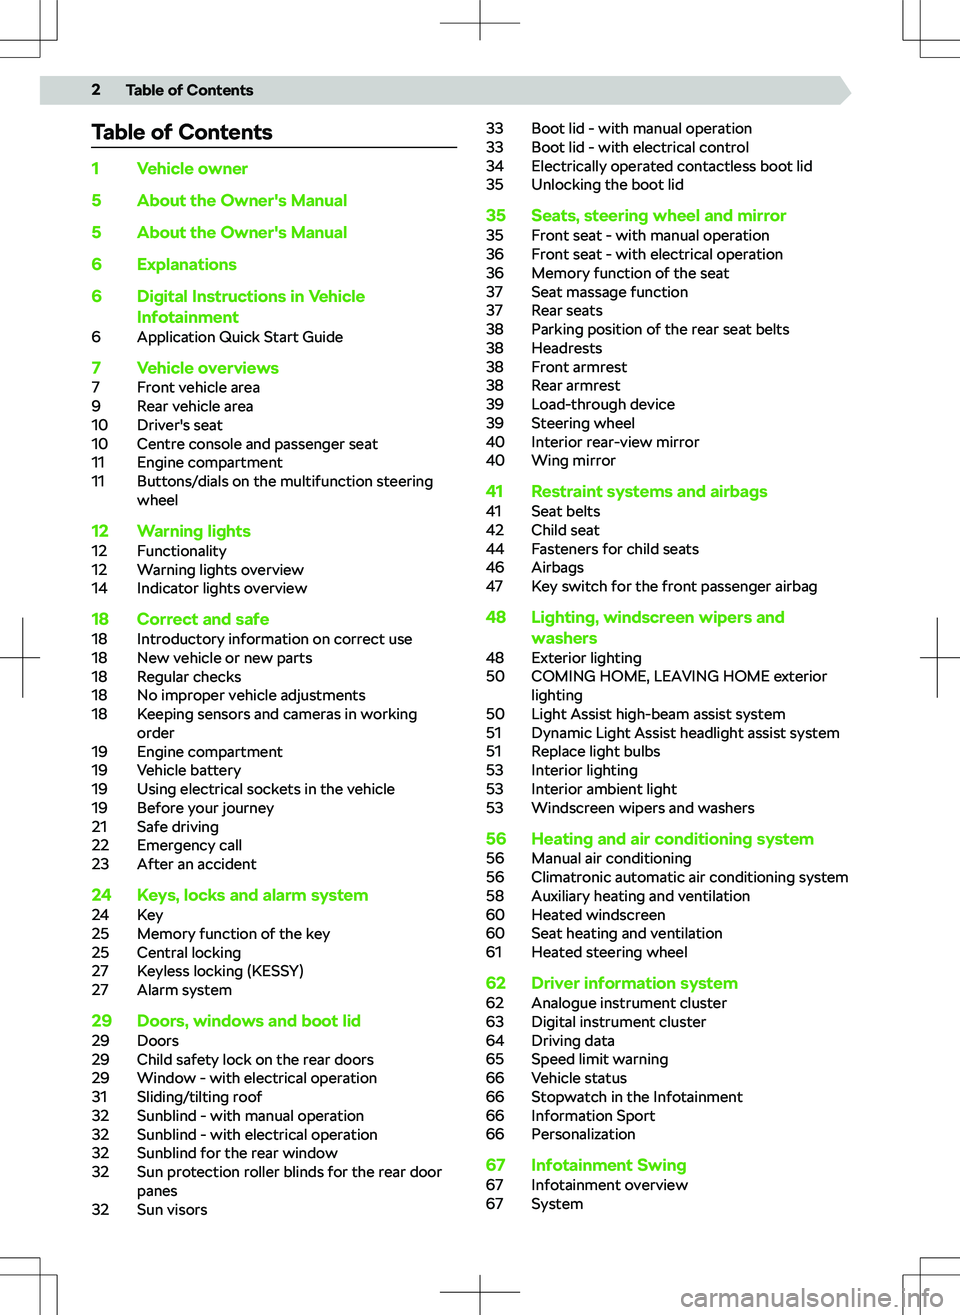 SKODA SUPERB 2020  Owner´s Manual Table of Contents1Vehicle owner5About the Owner